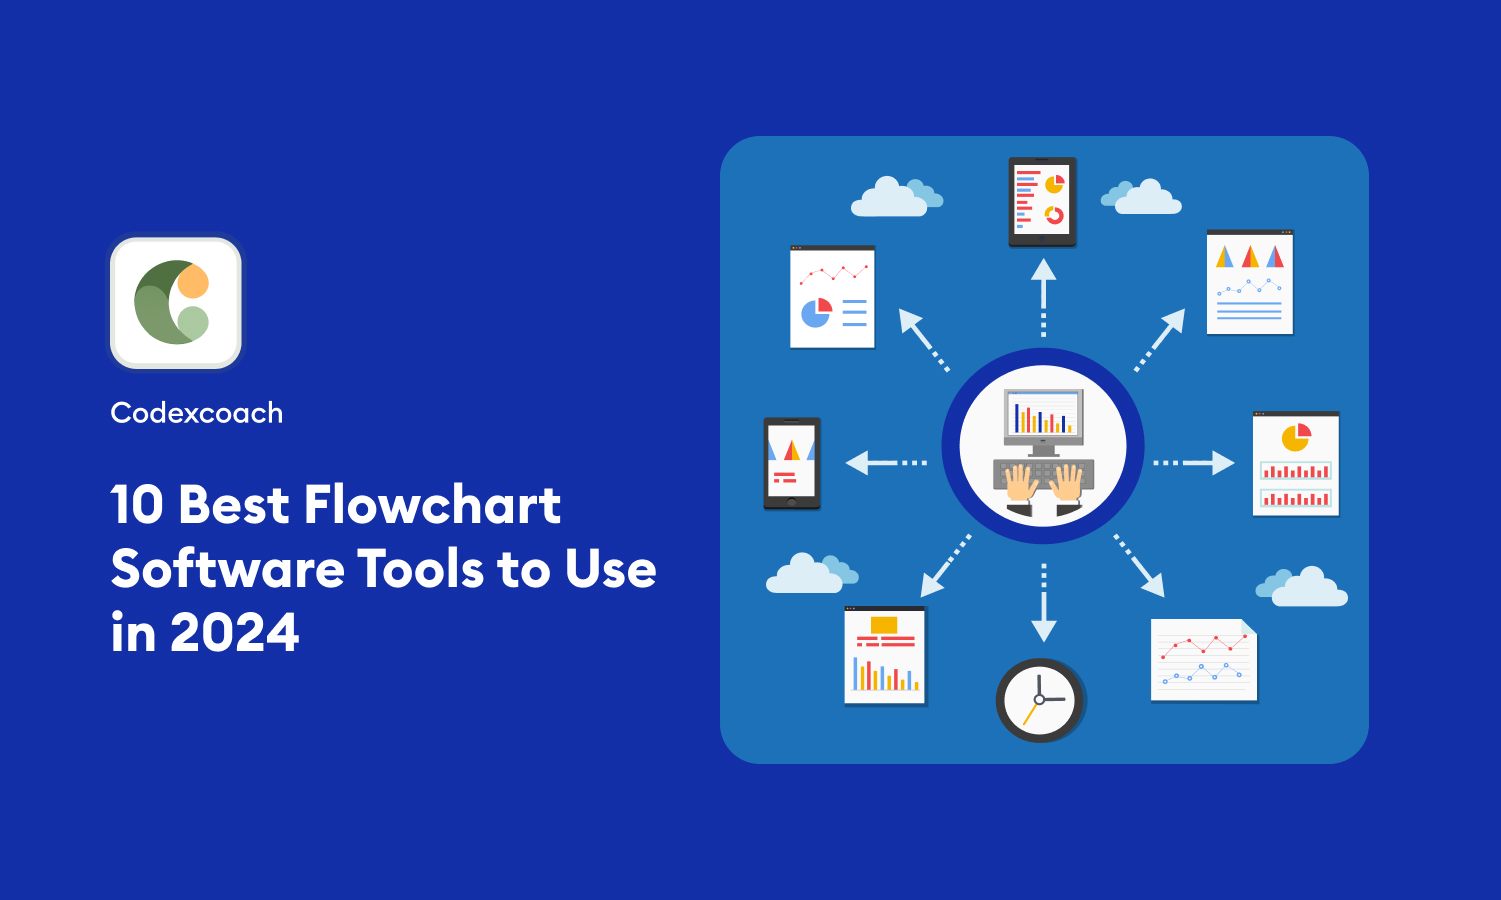 10 Best Flowchart Software Tools to Use in 2024